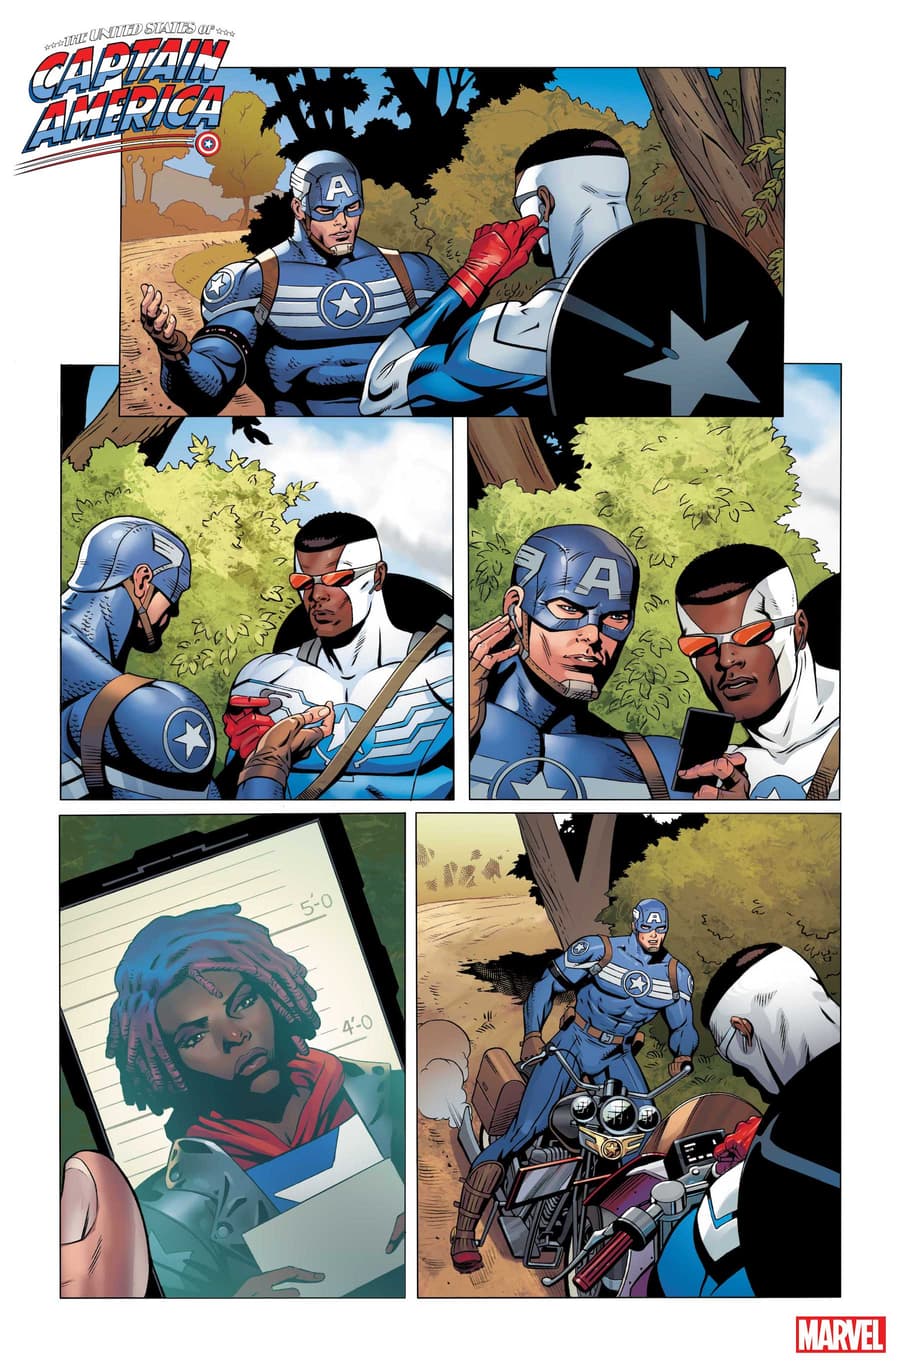 THE UNITED STATES OF CAPTAIN AMERICA #2 preview art by Dale Eaglesham with colors by Matt Milla